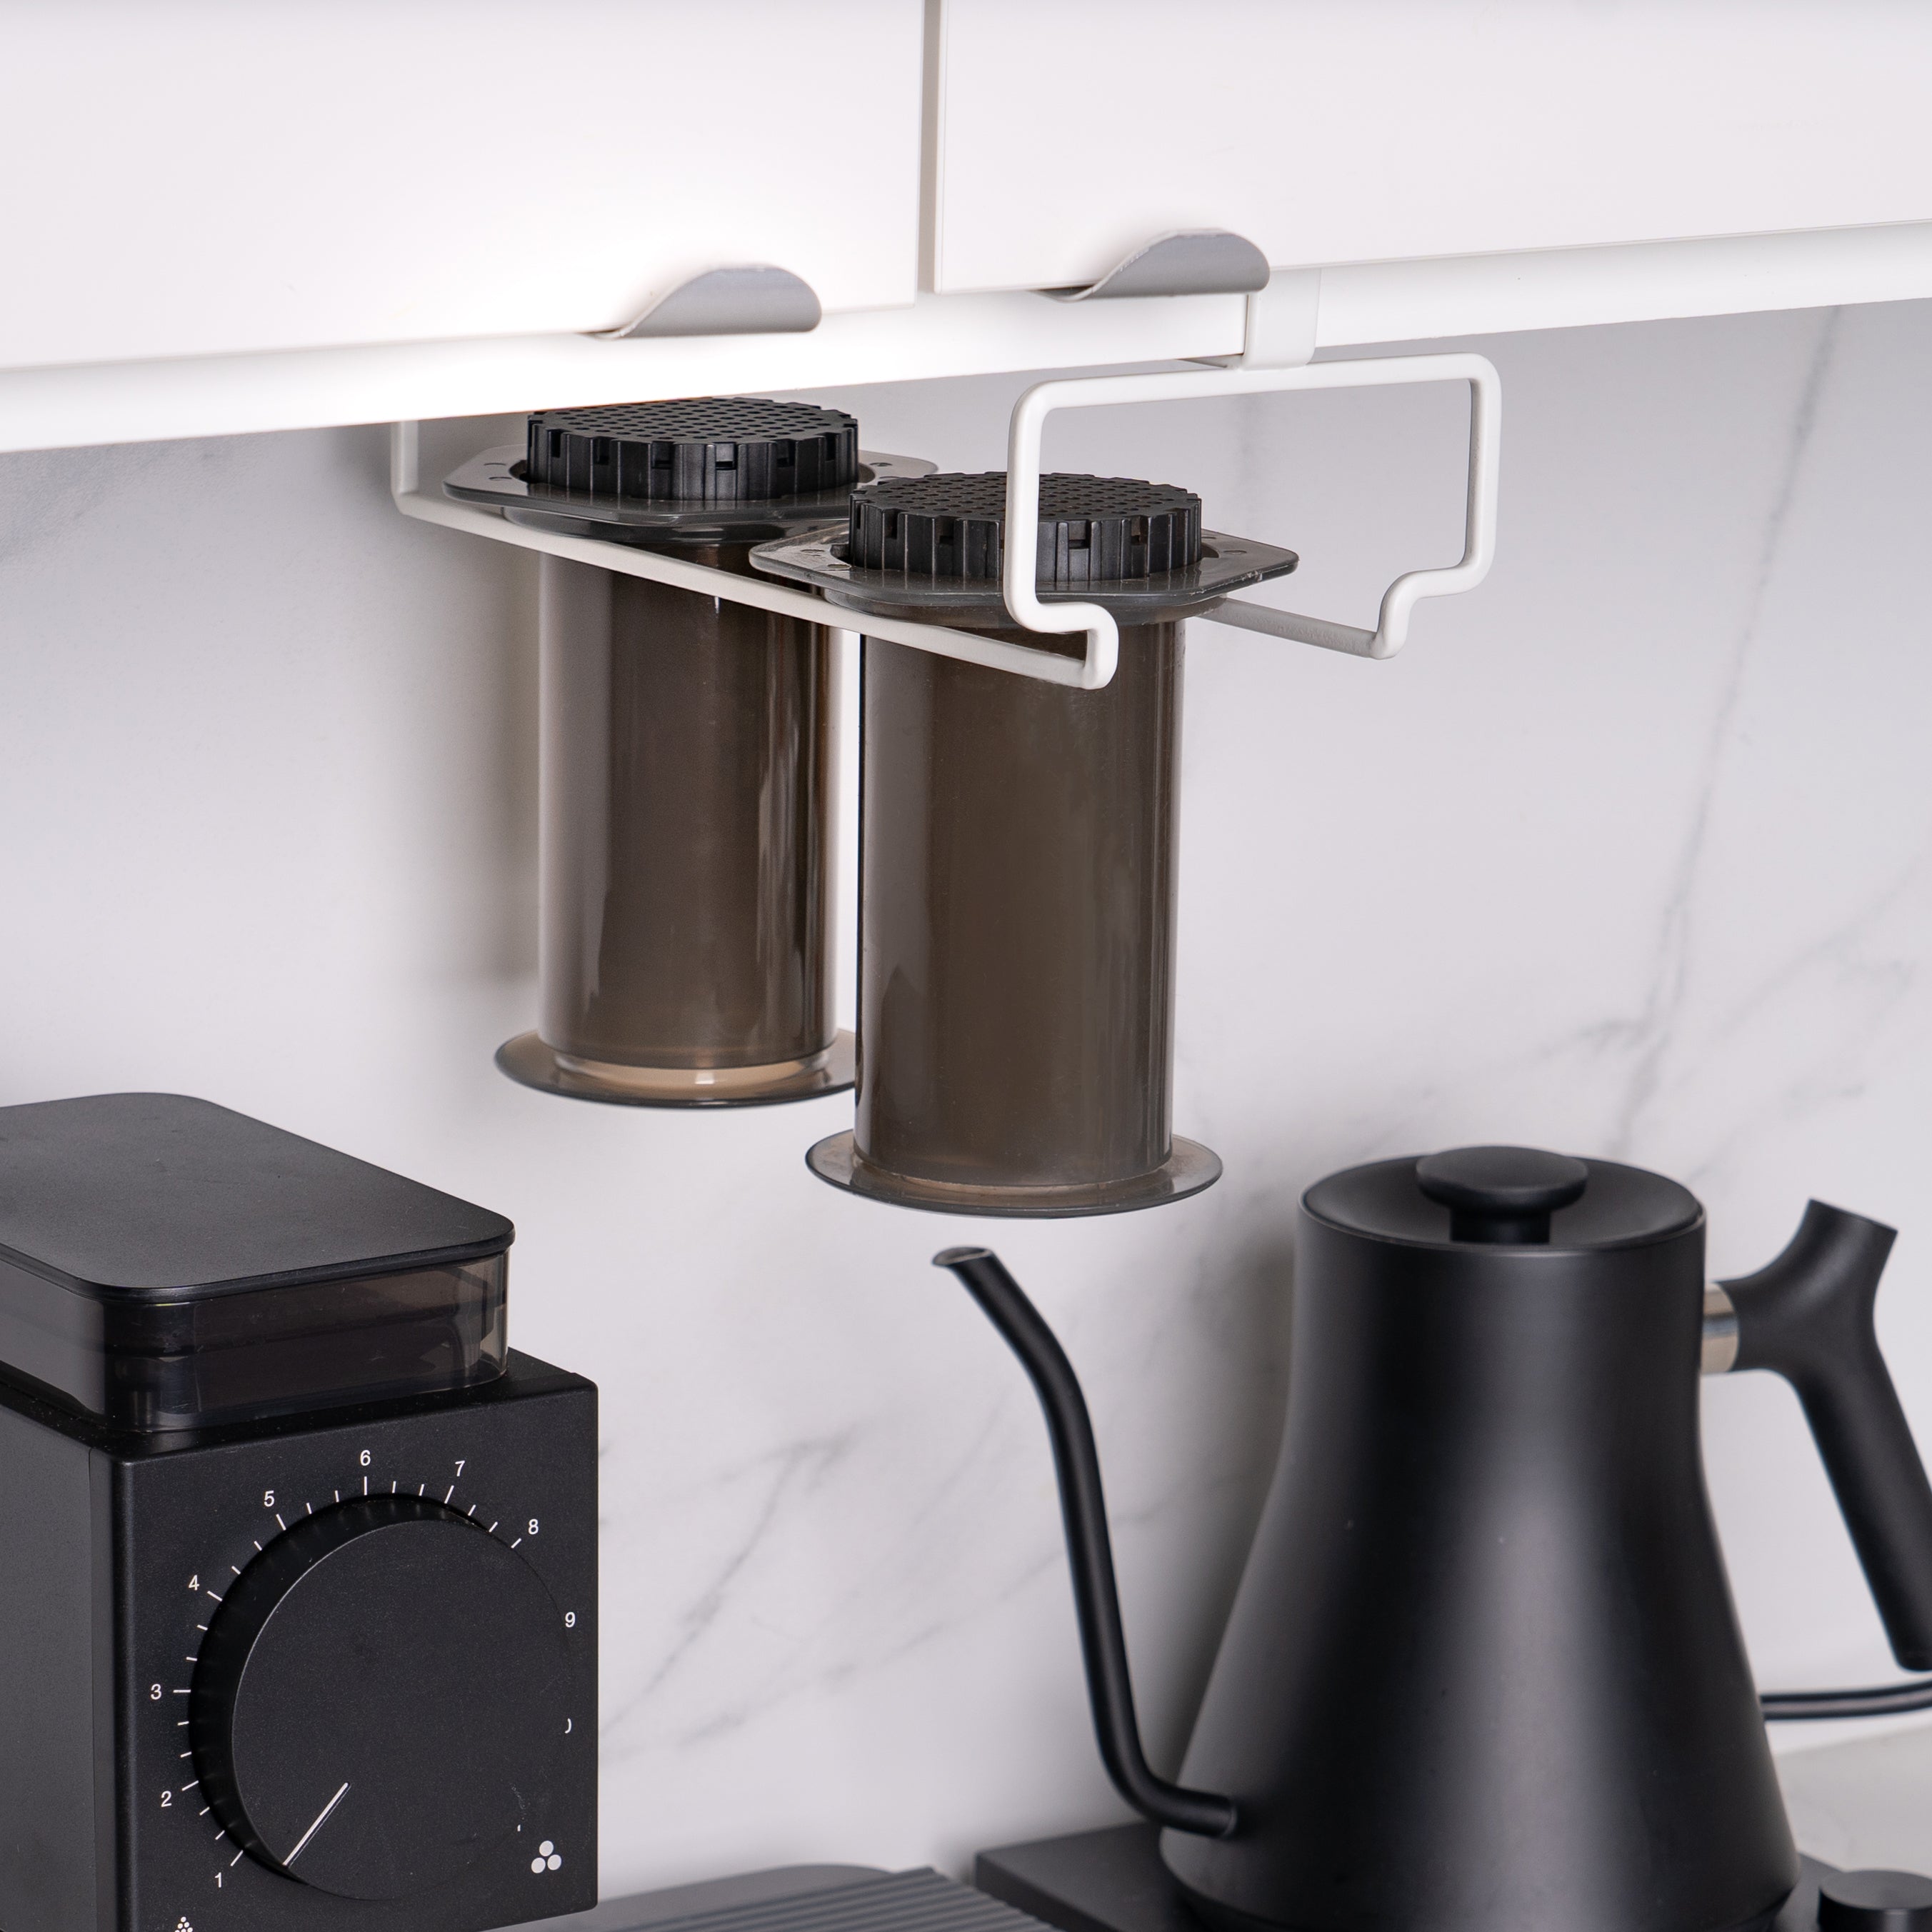 Altura The Rack: Under Cabinet Rack Compatible with Aeropress Coffee Maker. Fits Original and Go. Holder Station - Holder Stand - Caddy Station